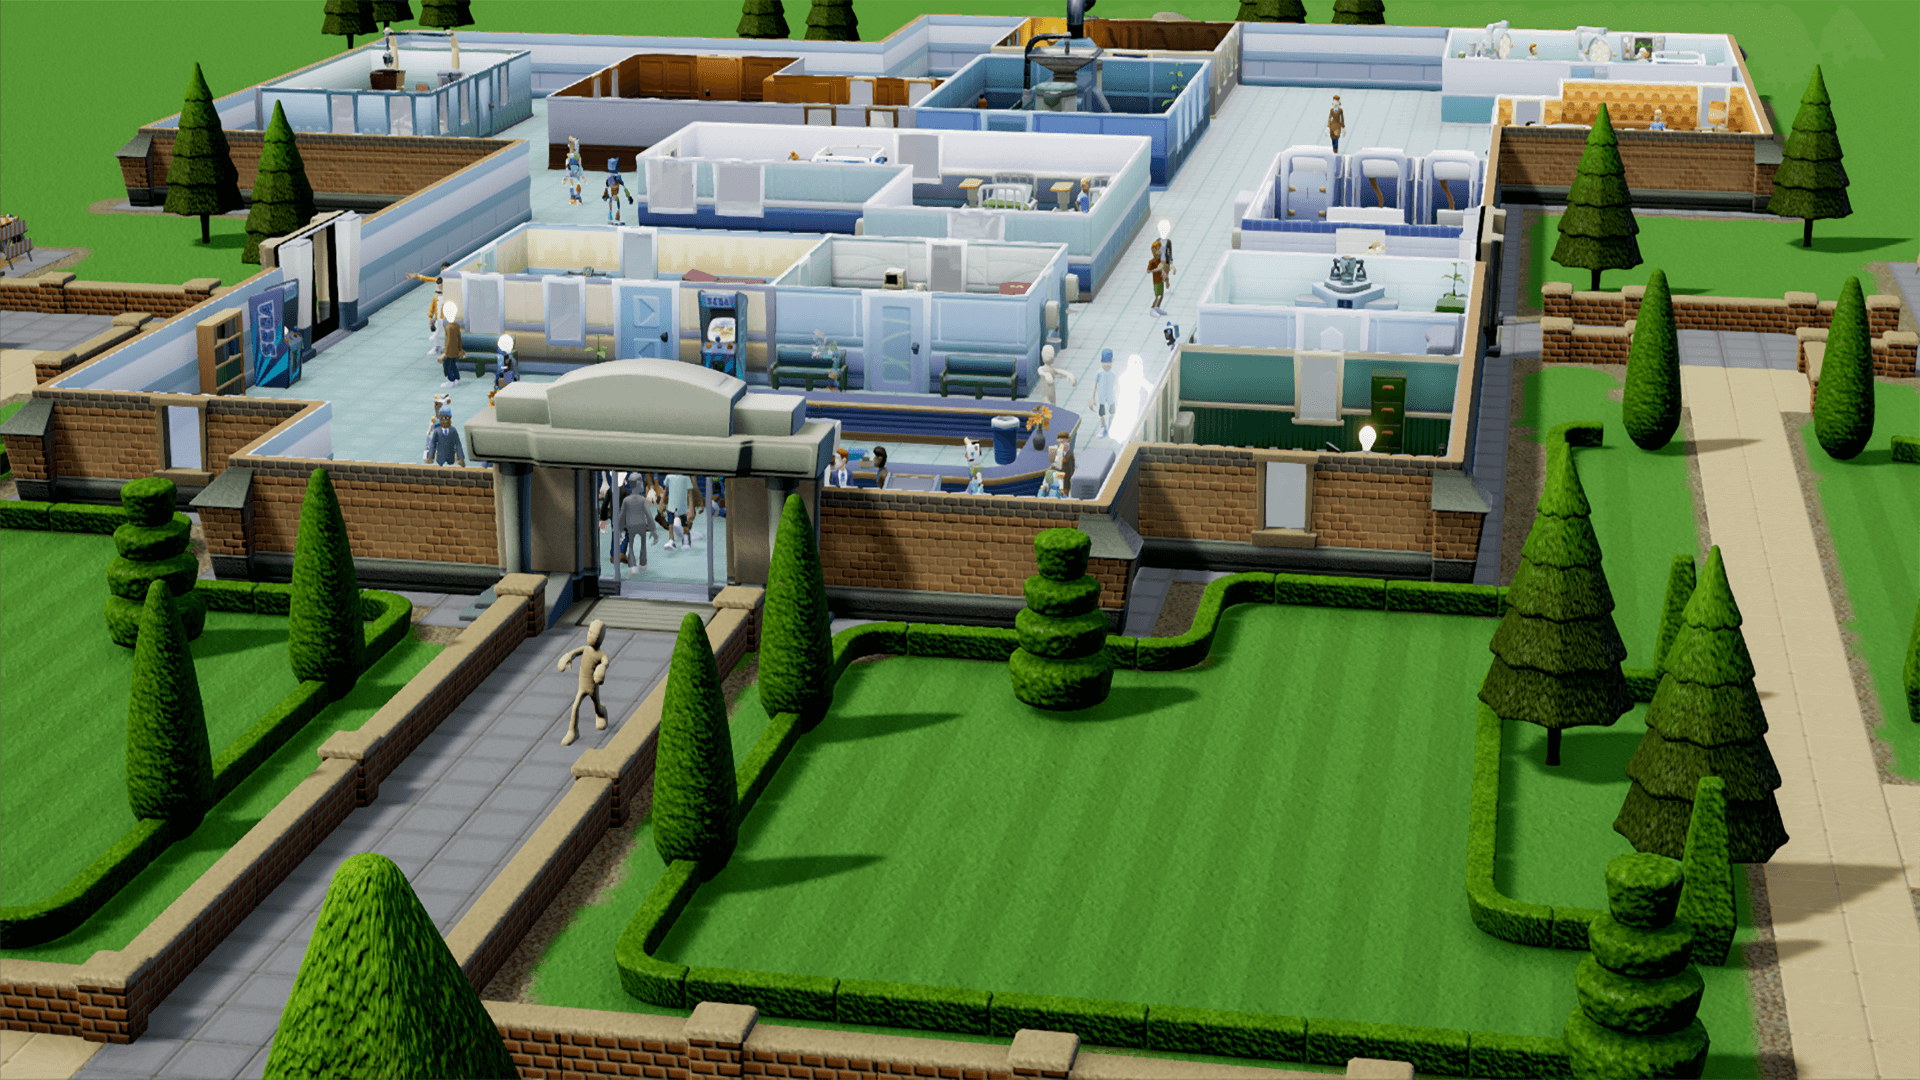 A quaint looking hospital in the game Two Point Hospital